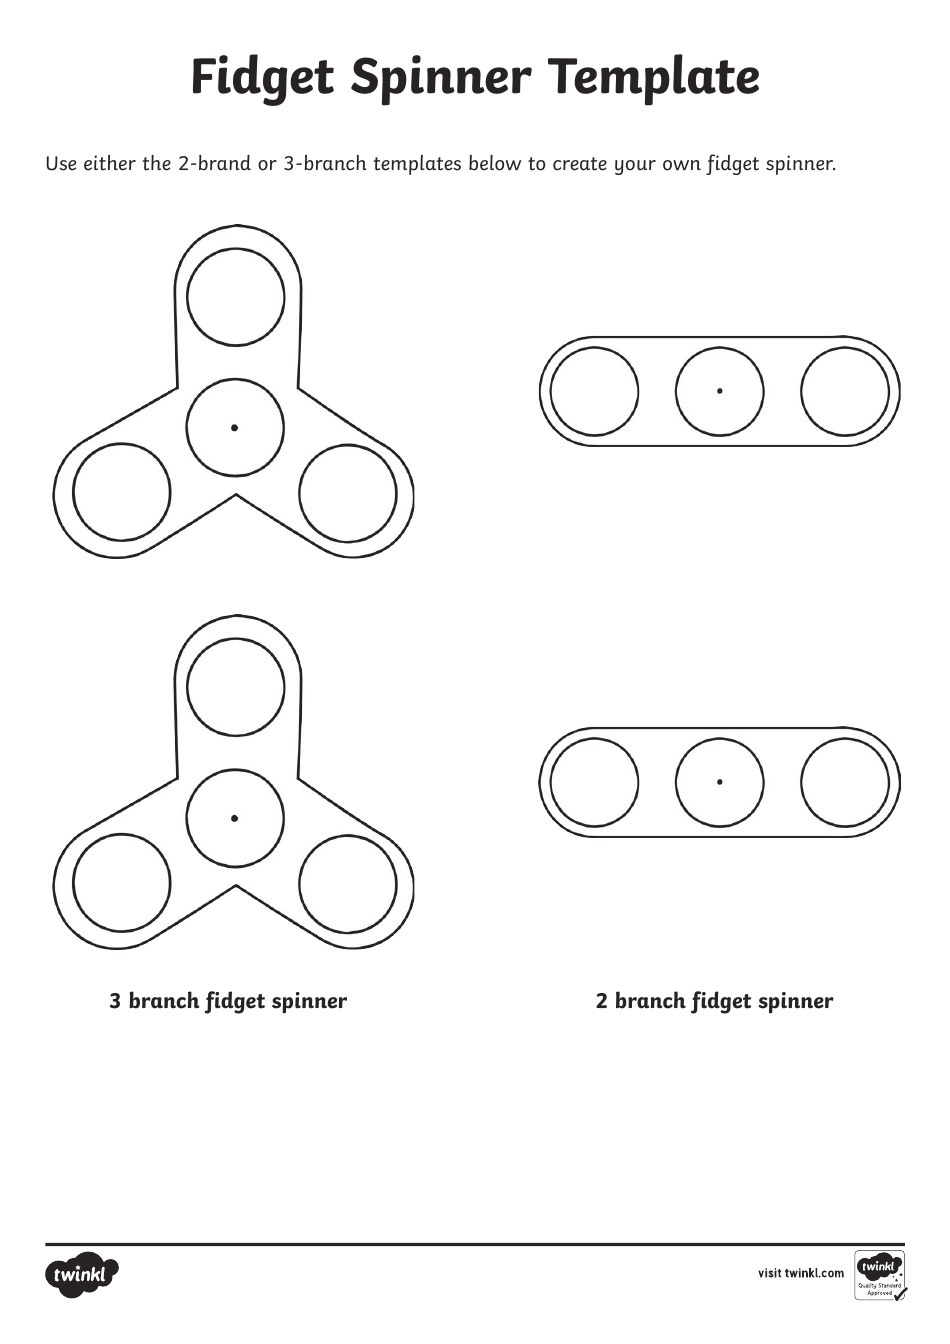 Fidget Spinner Templates - Black and White, Page 1